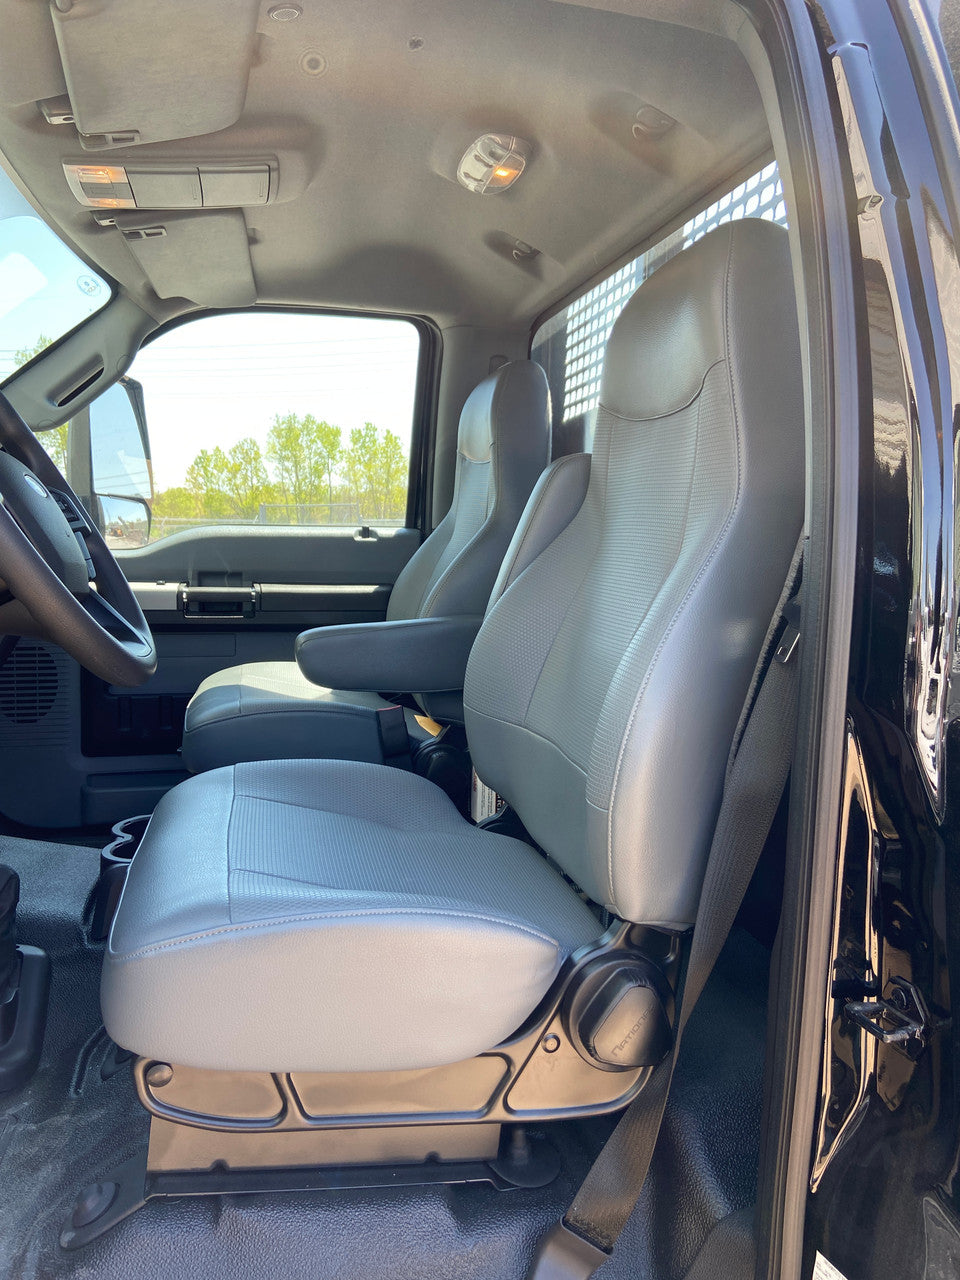 F650/F750 with Air Ride Bucket Seats